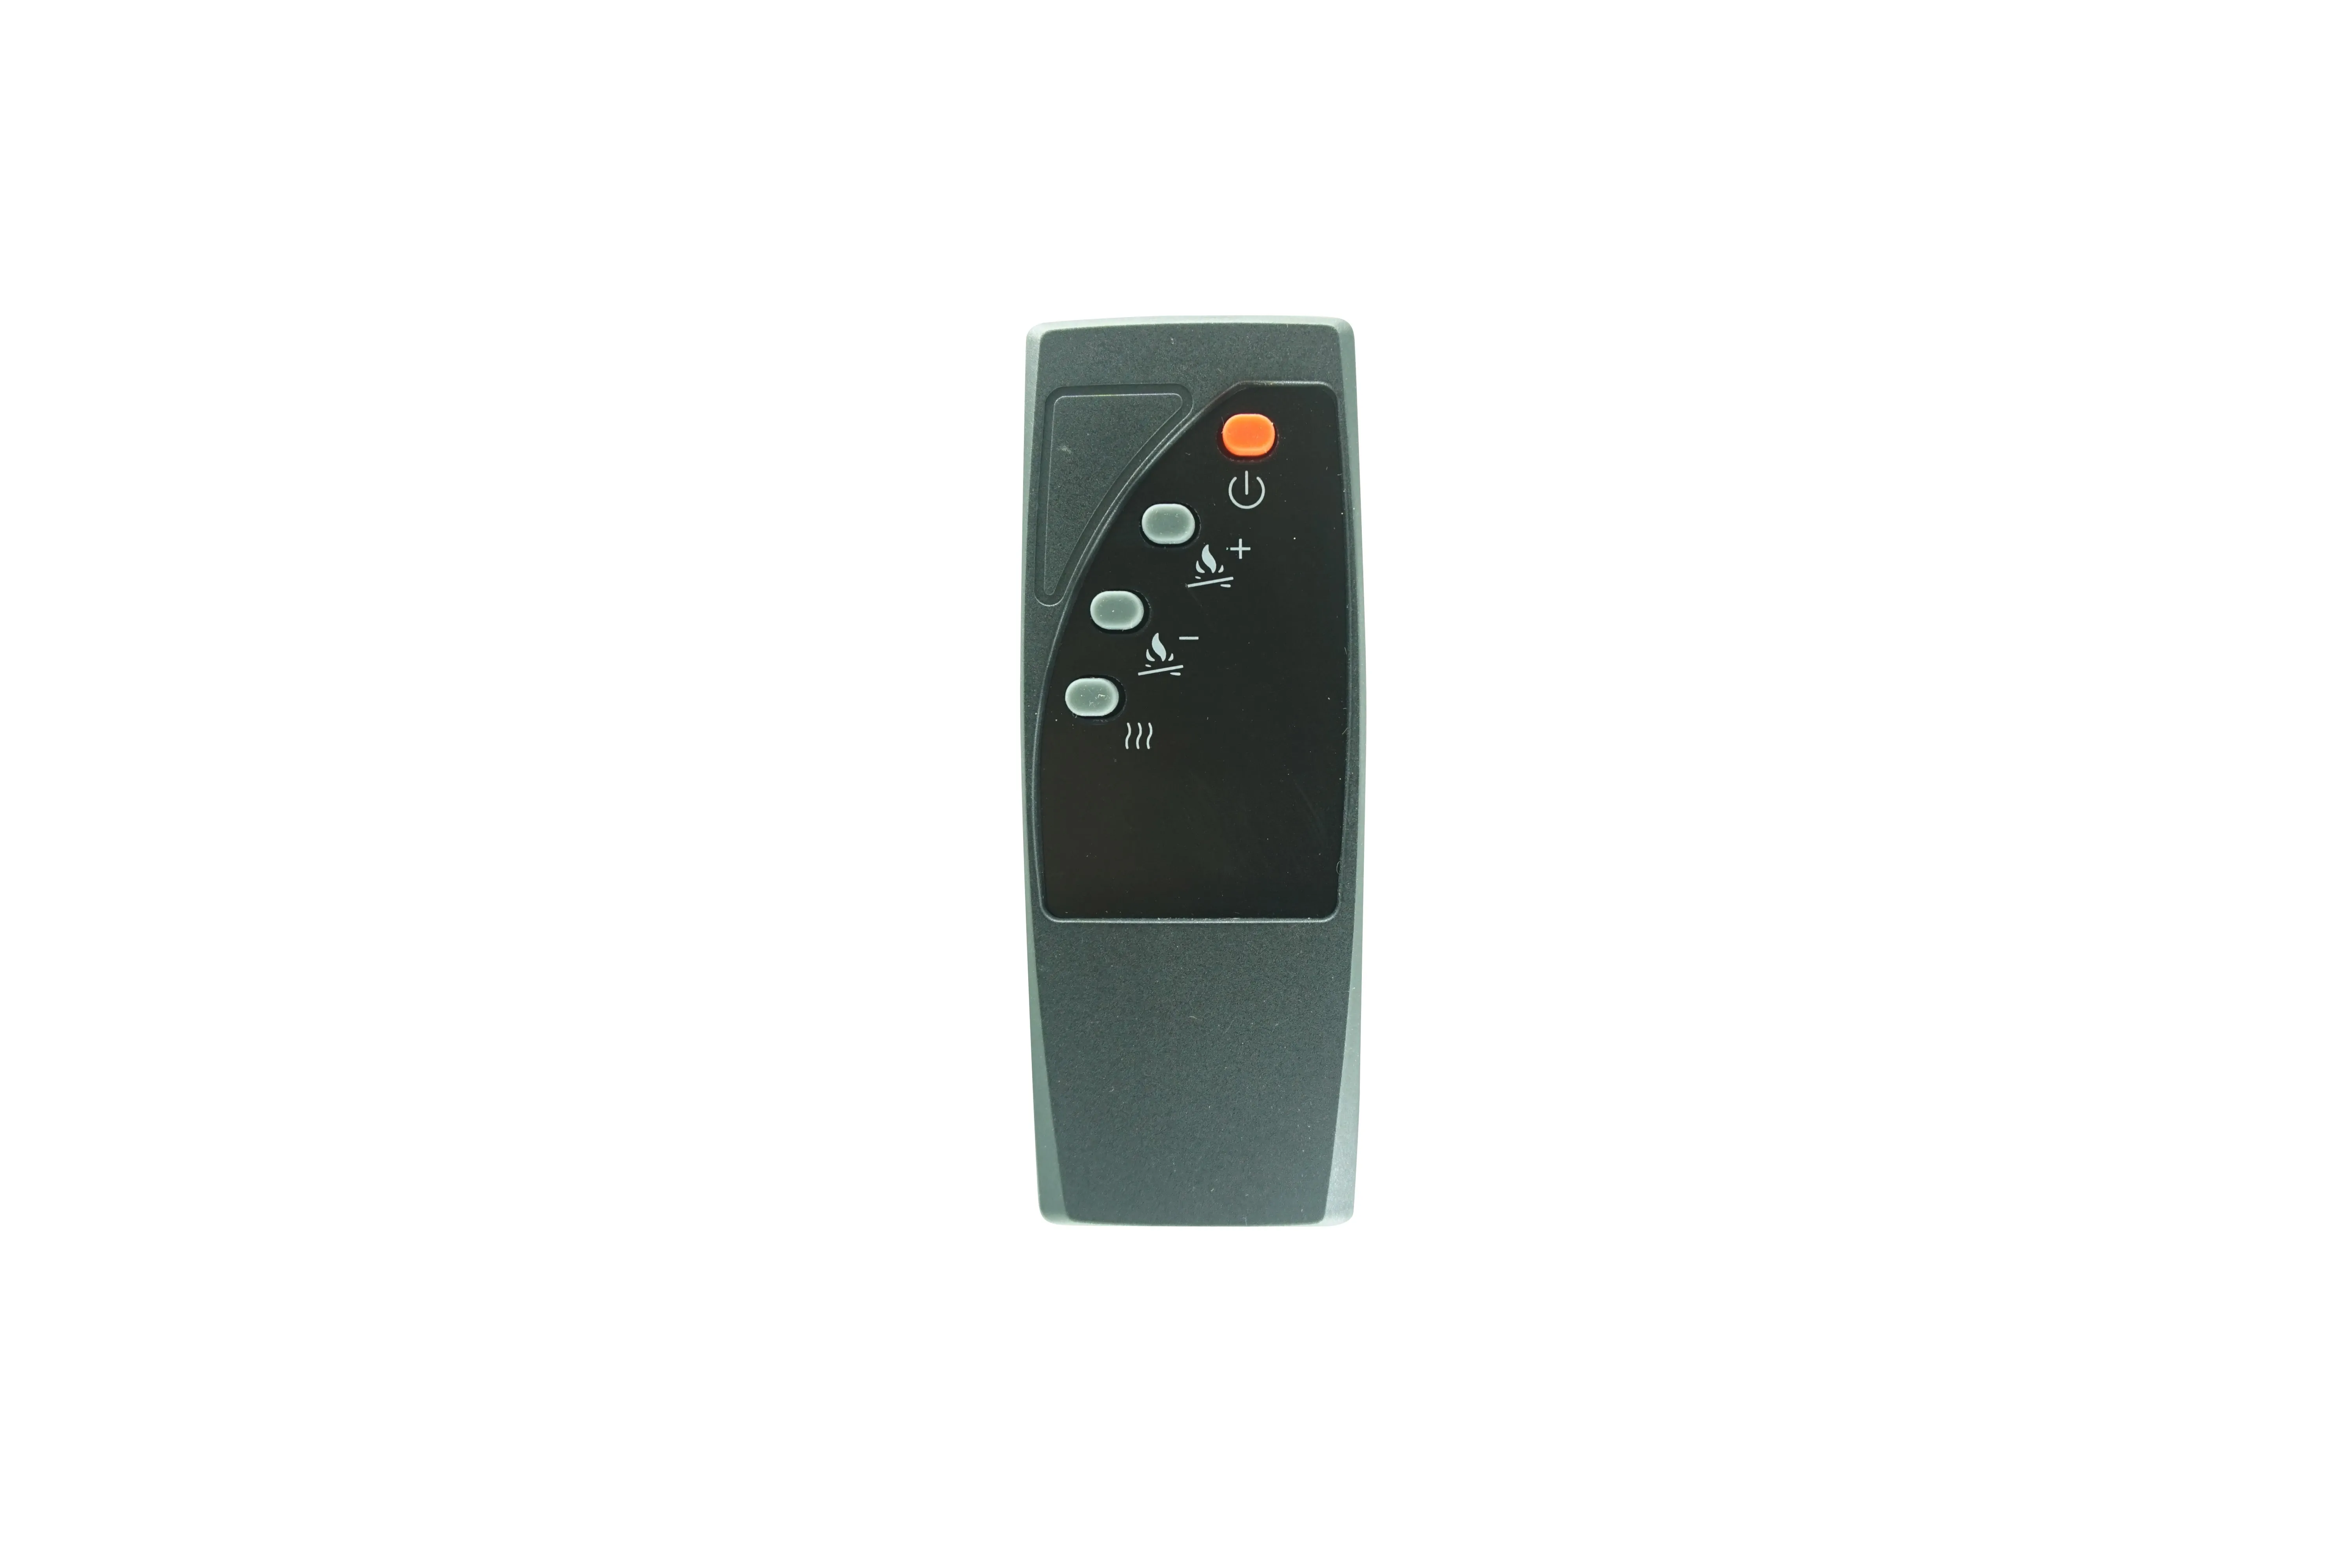 Remote Control For Twin Star Duraflame DFS-550-22 DFS-550-22-BLK DFS-550-22-RED DFS-550-24 DFS-550-25 DFS-550-26 DFS-550-27 3D Electric Fireplace Heater